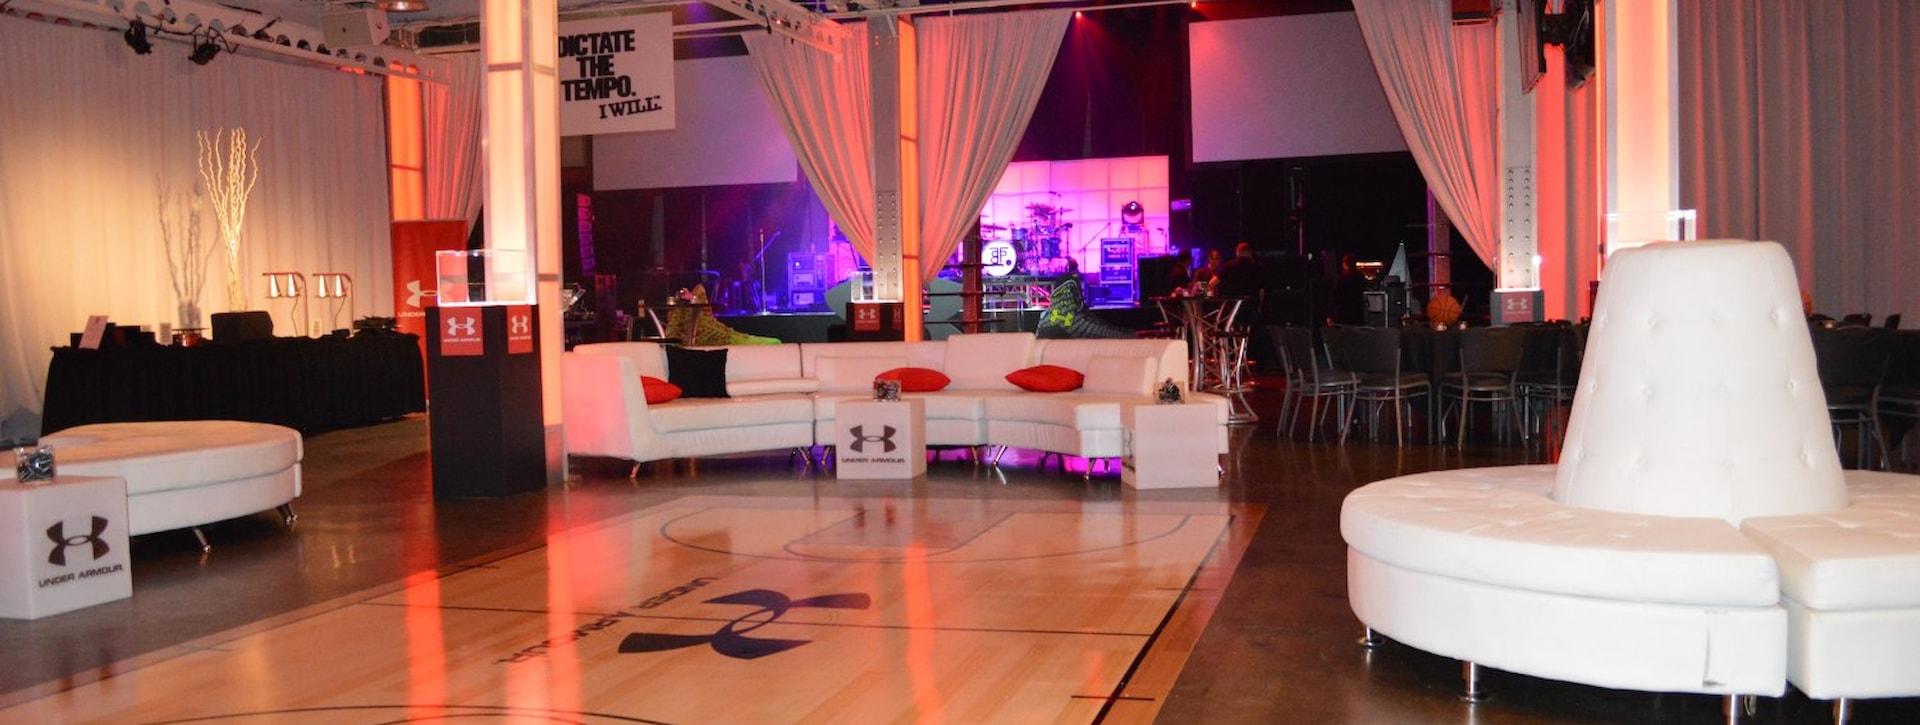 Basketball Themed Event Venue Downtown Indianapolis Final Four